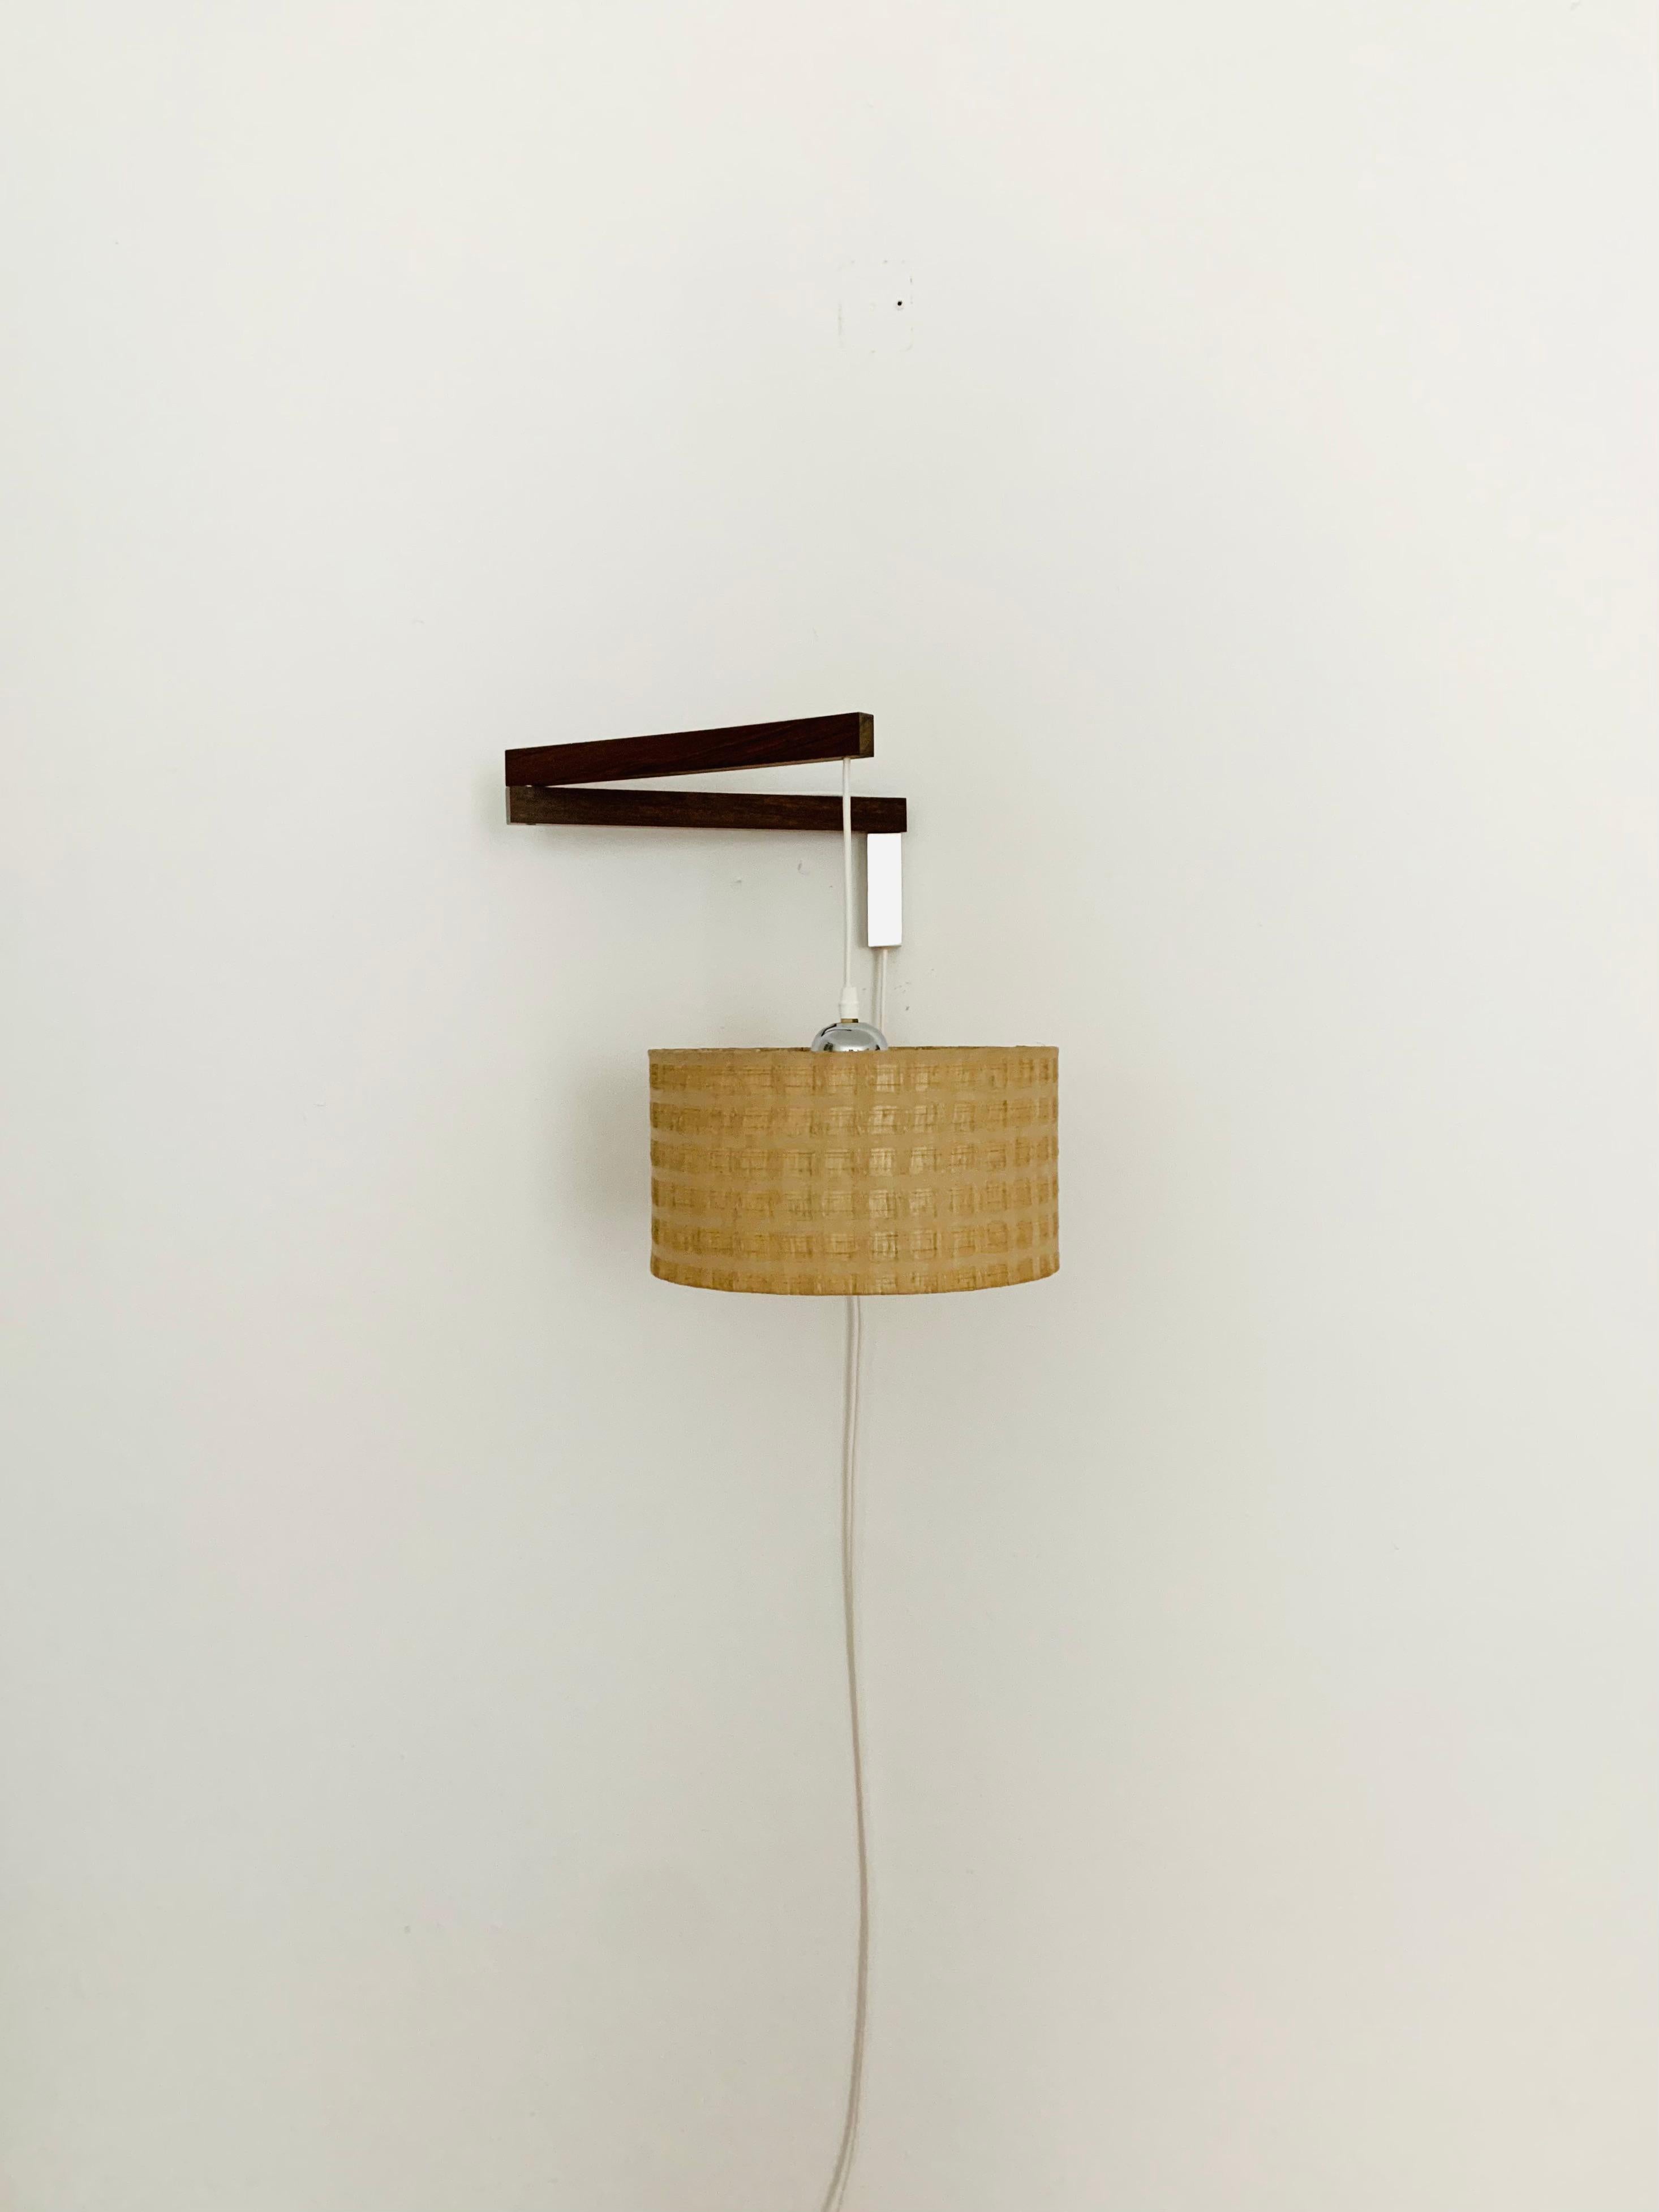 Wonderful wall lamp from the 1960s.
Great and exceptionally minimalistic design with a fantastically elegant look.
Very nice swiveling rosewood arm.
The lampshade creates a spectacular play of light and creates a very cozy